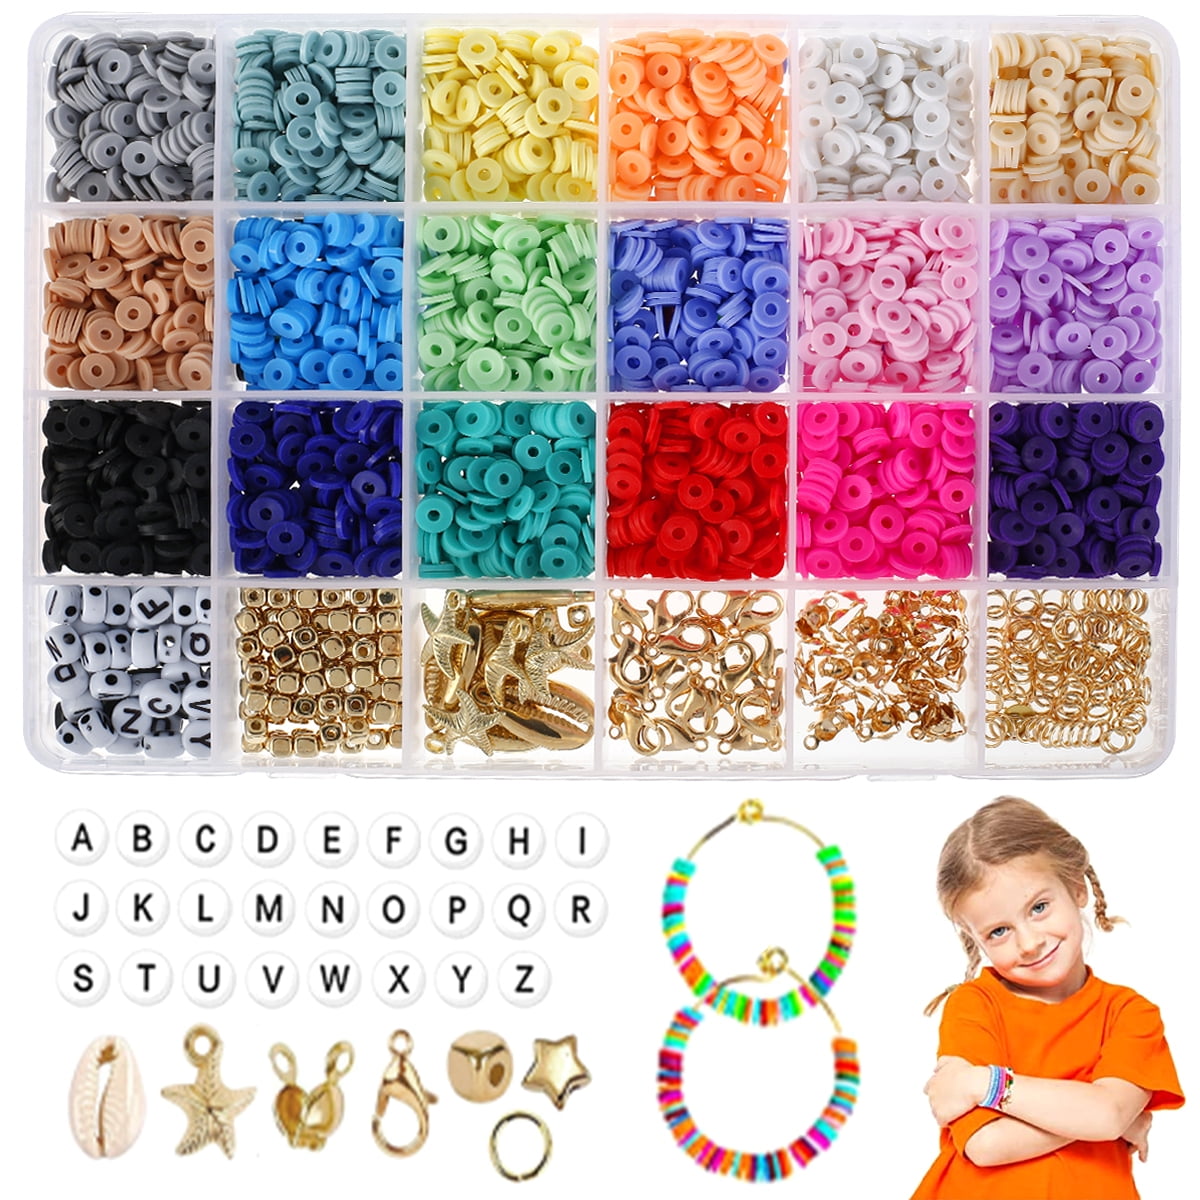 6000 Pcs Clay Beads for Bracelet Making, Gionlion 24 Colors Flat Round  Polymer Clay Beads 6mm Spacer Heishi Beads with Pendant Charms Kit and  Elastic Strings for Jewelry Making Kit Bracelets Necklace